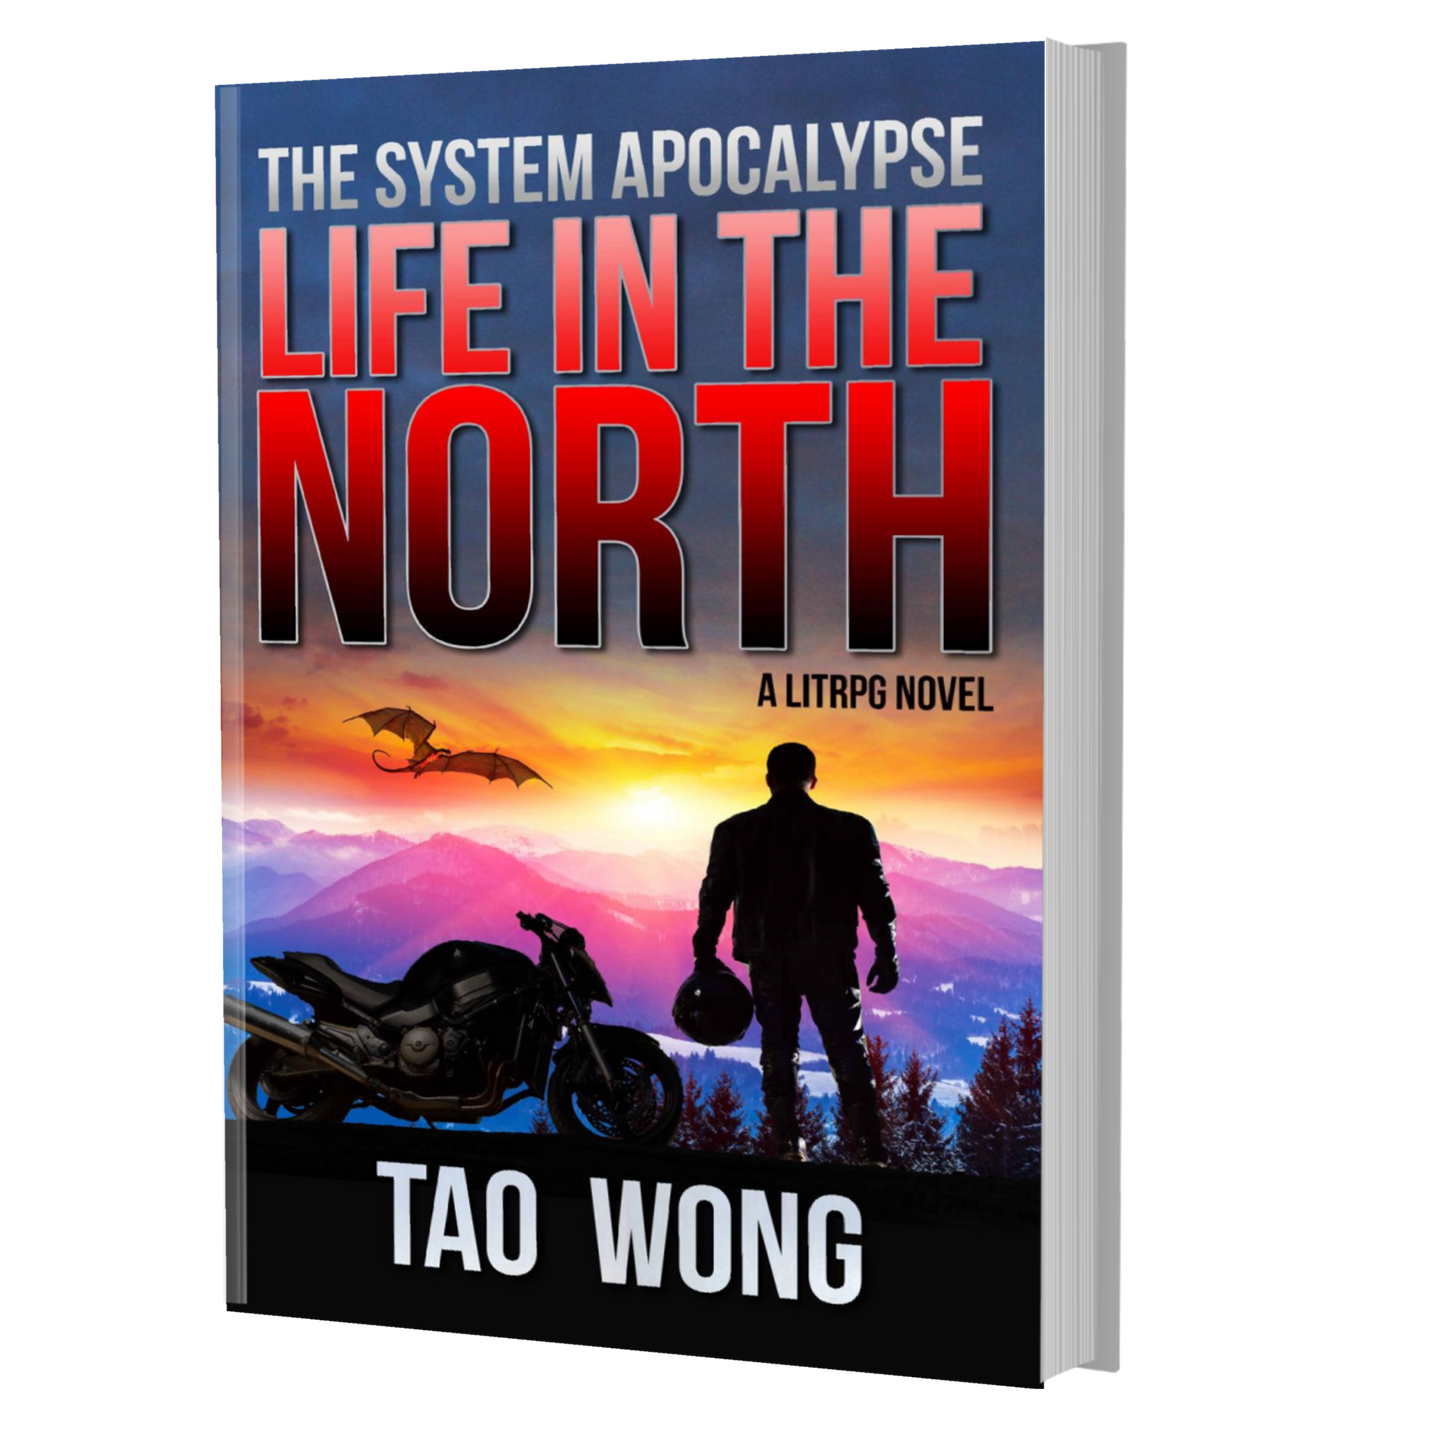  Life in the North: A LitRPG Apocalypse: The System